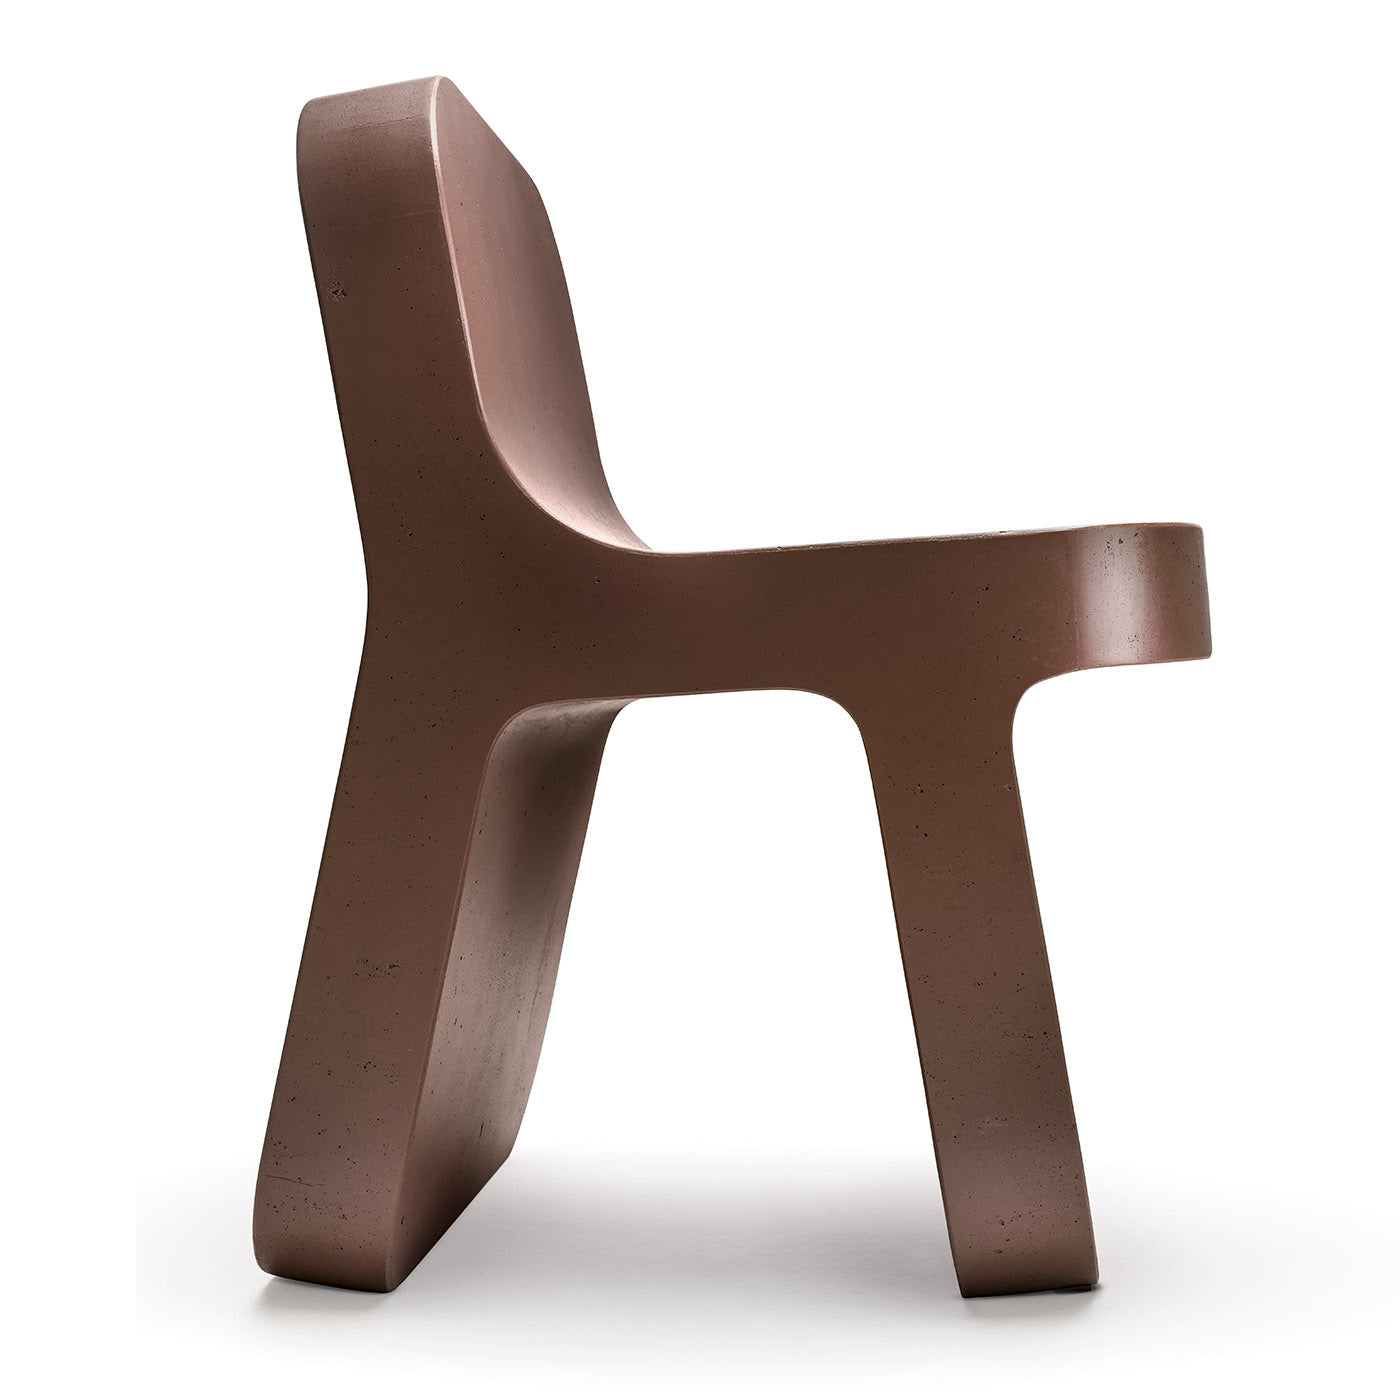 Torcello Chair by Defne Koz and Marco Susani - Alternative view 3